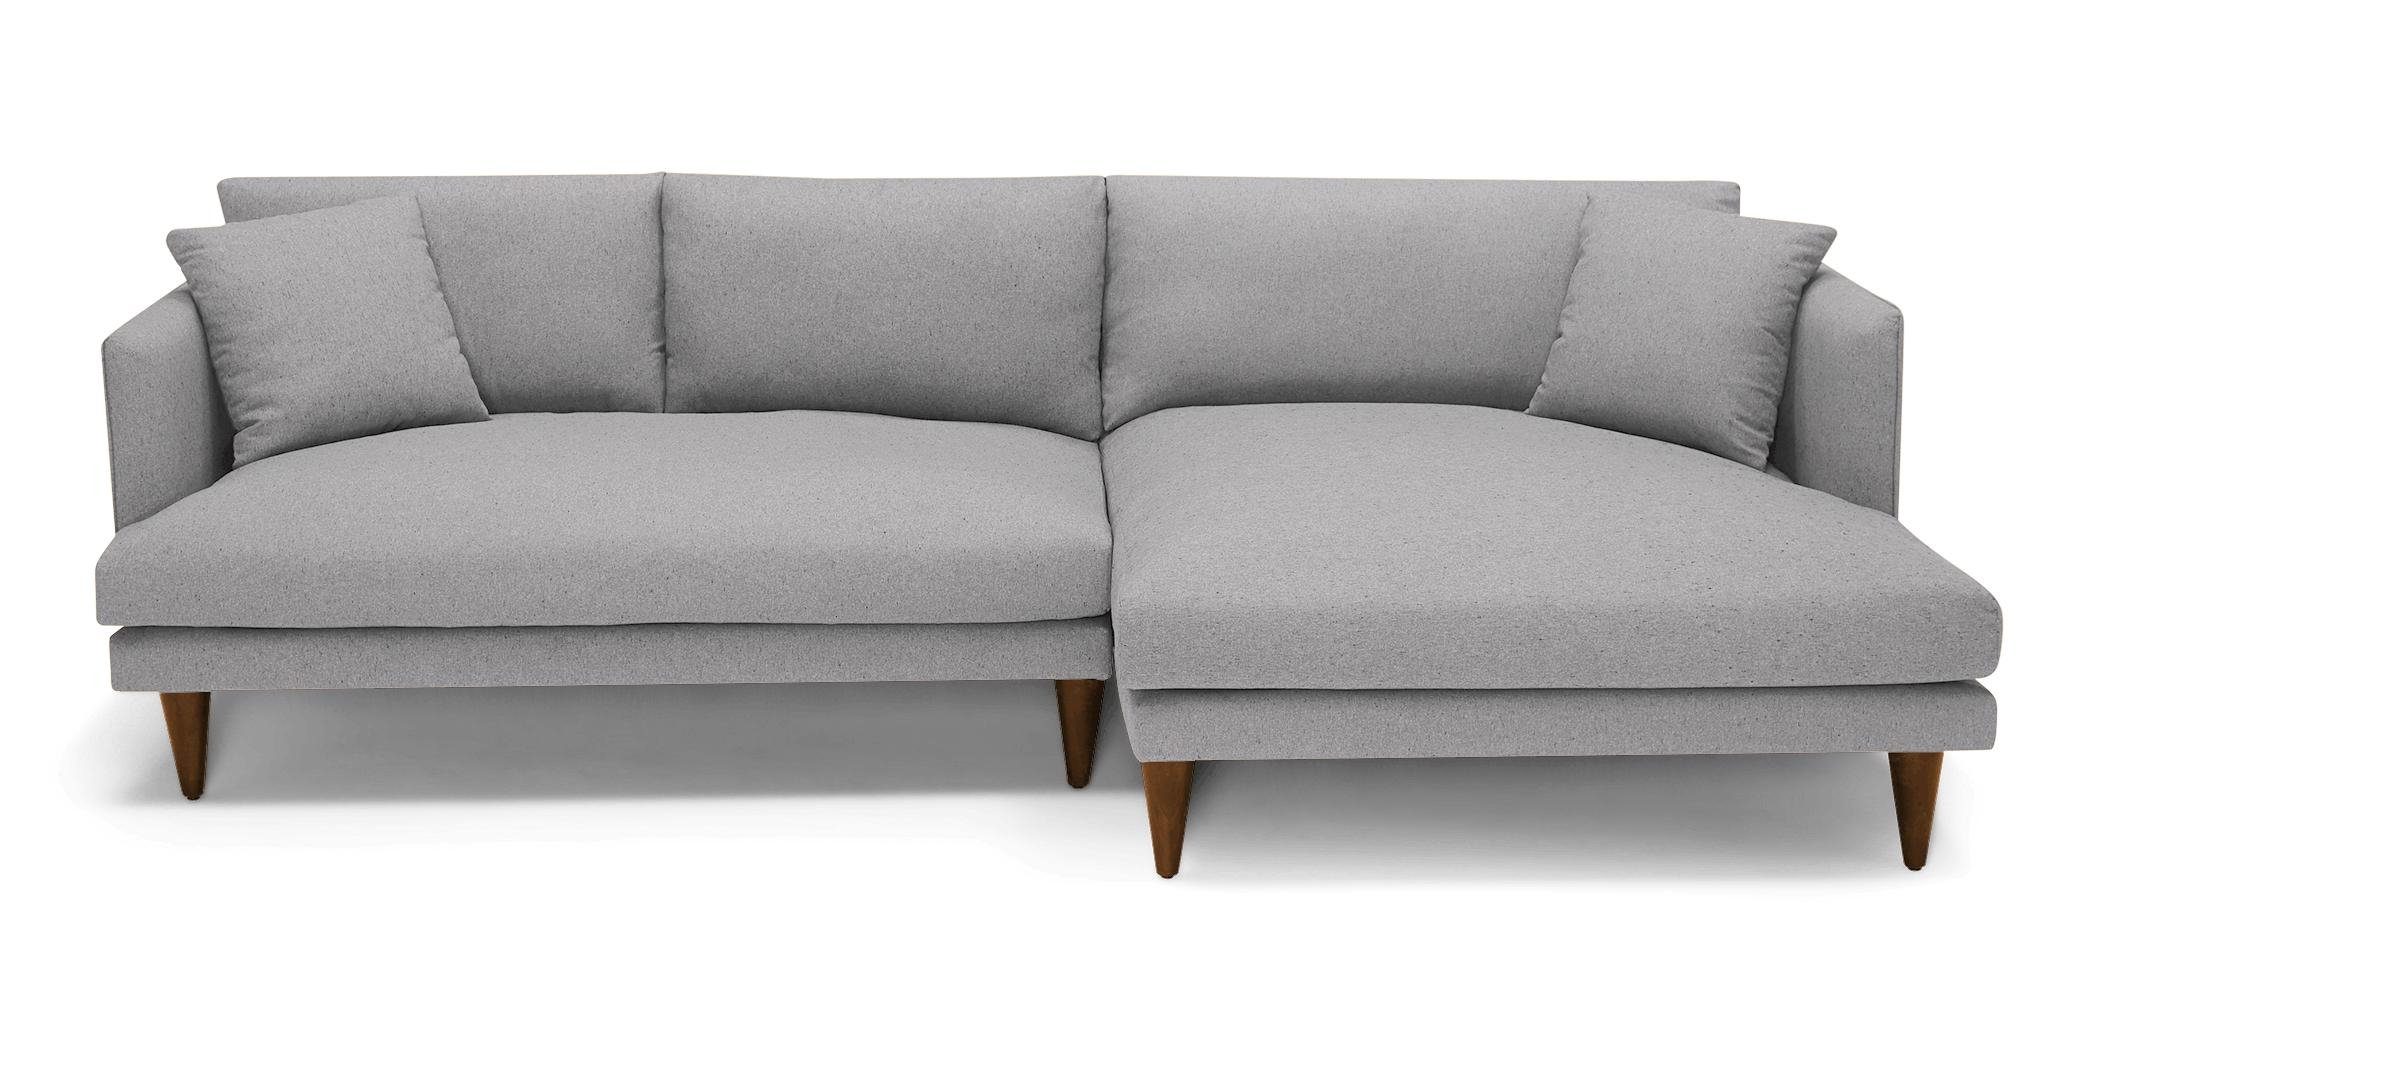 Gray Lewis Mid Century Modern Sectional - Royale Ash - Mocha - Left - Cone - Image 0